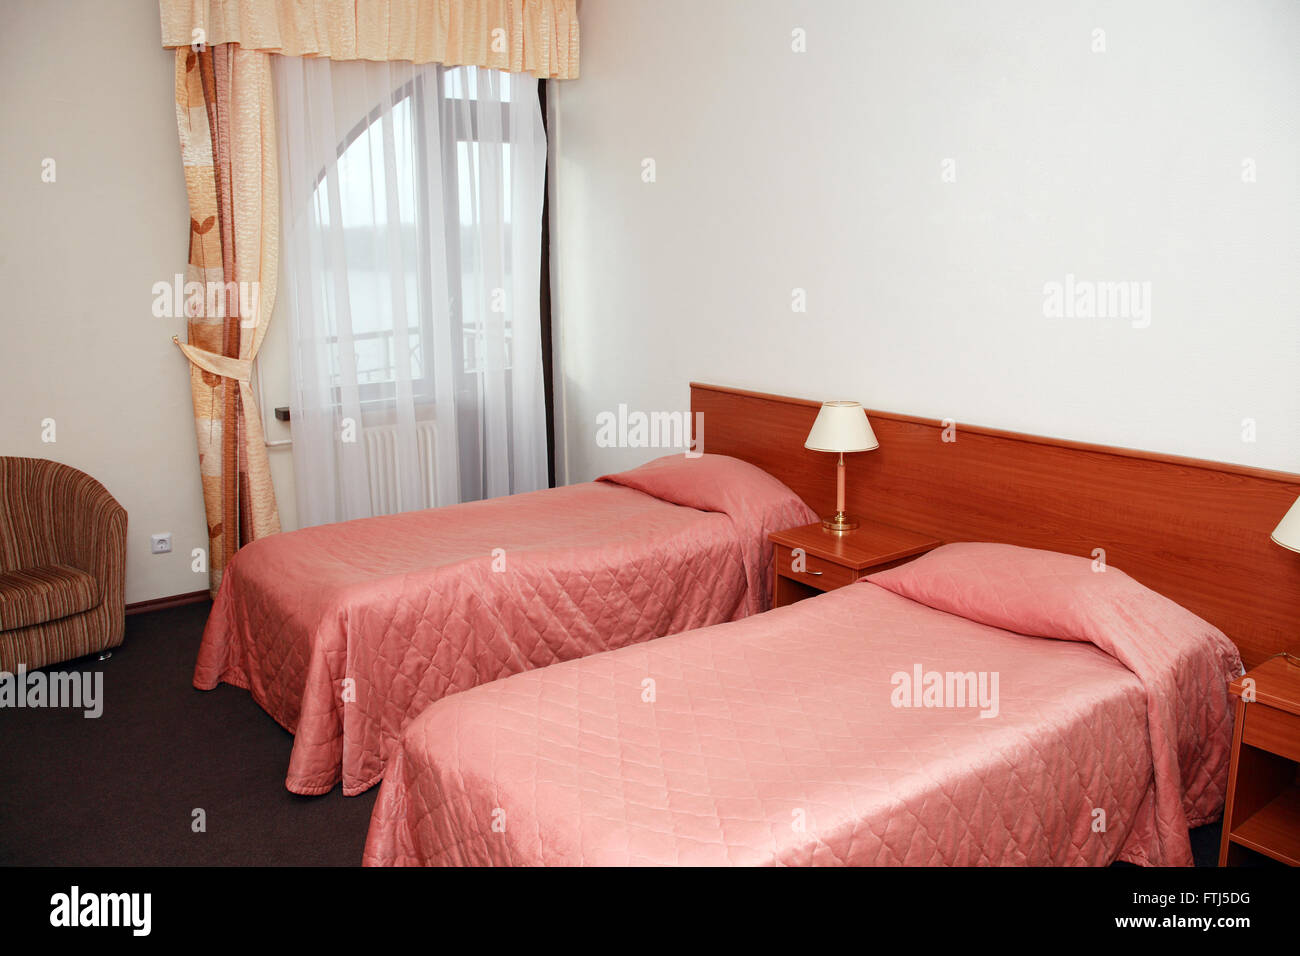 Home interior. Empty hotel room with two beds Stock Photo